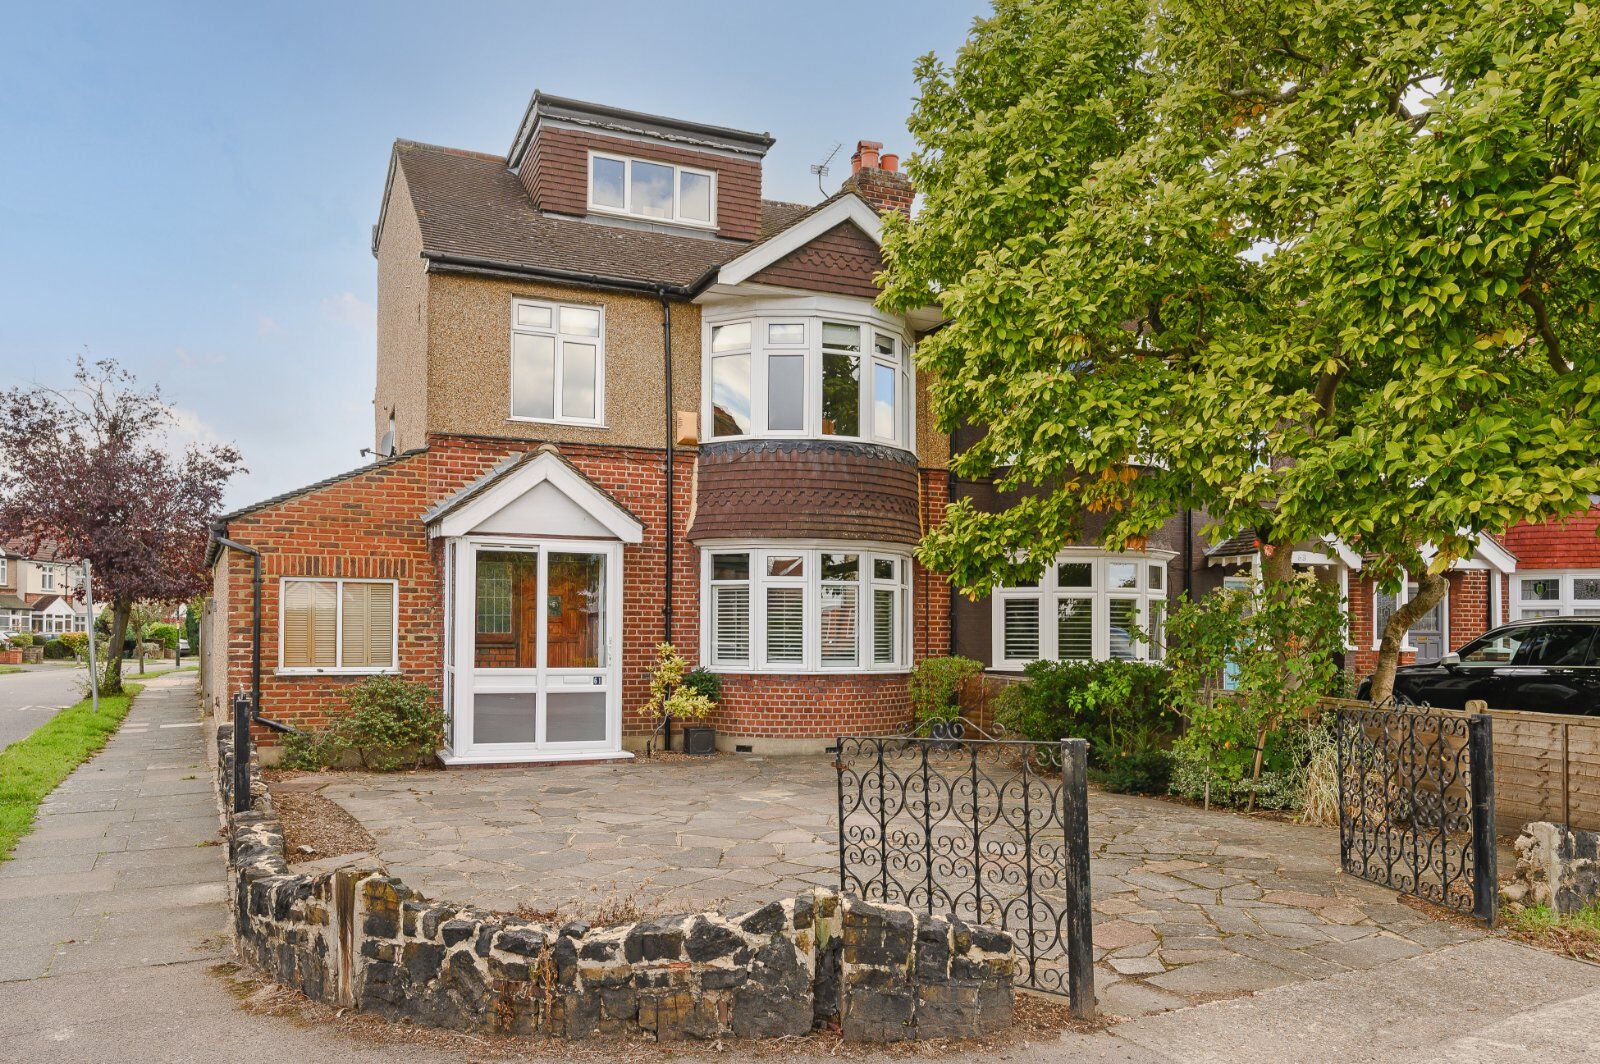 4 bedroom semi detached house for sale Circle Gardens, London, SW19, main image